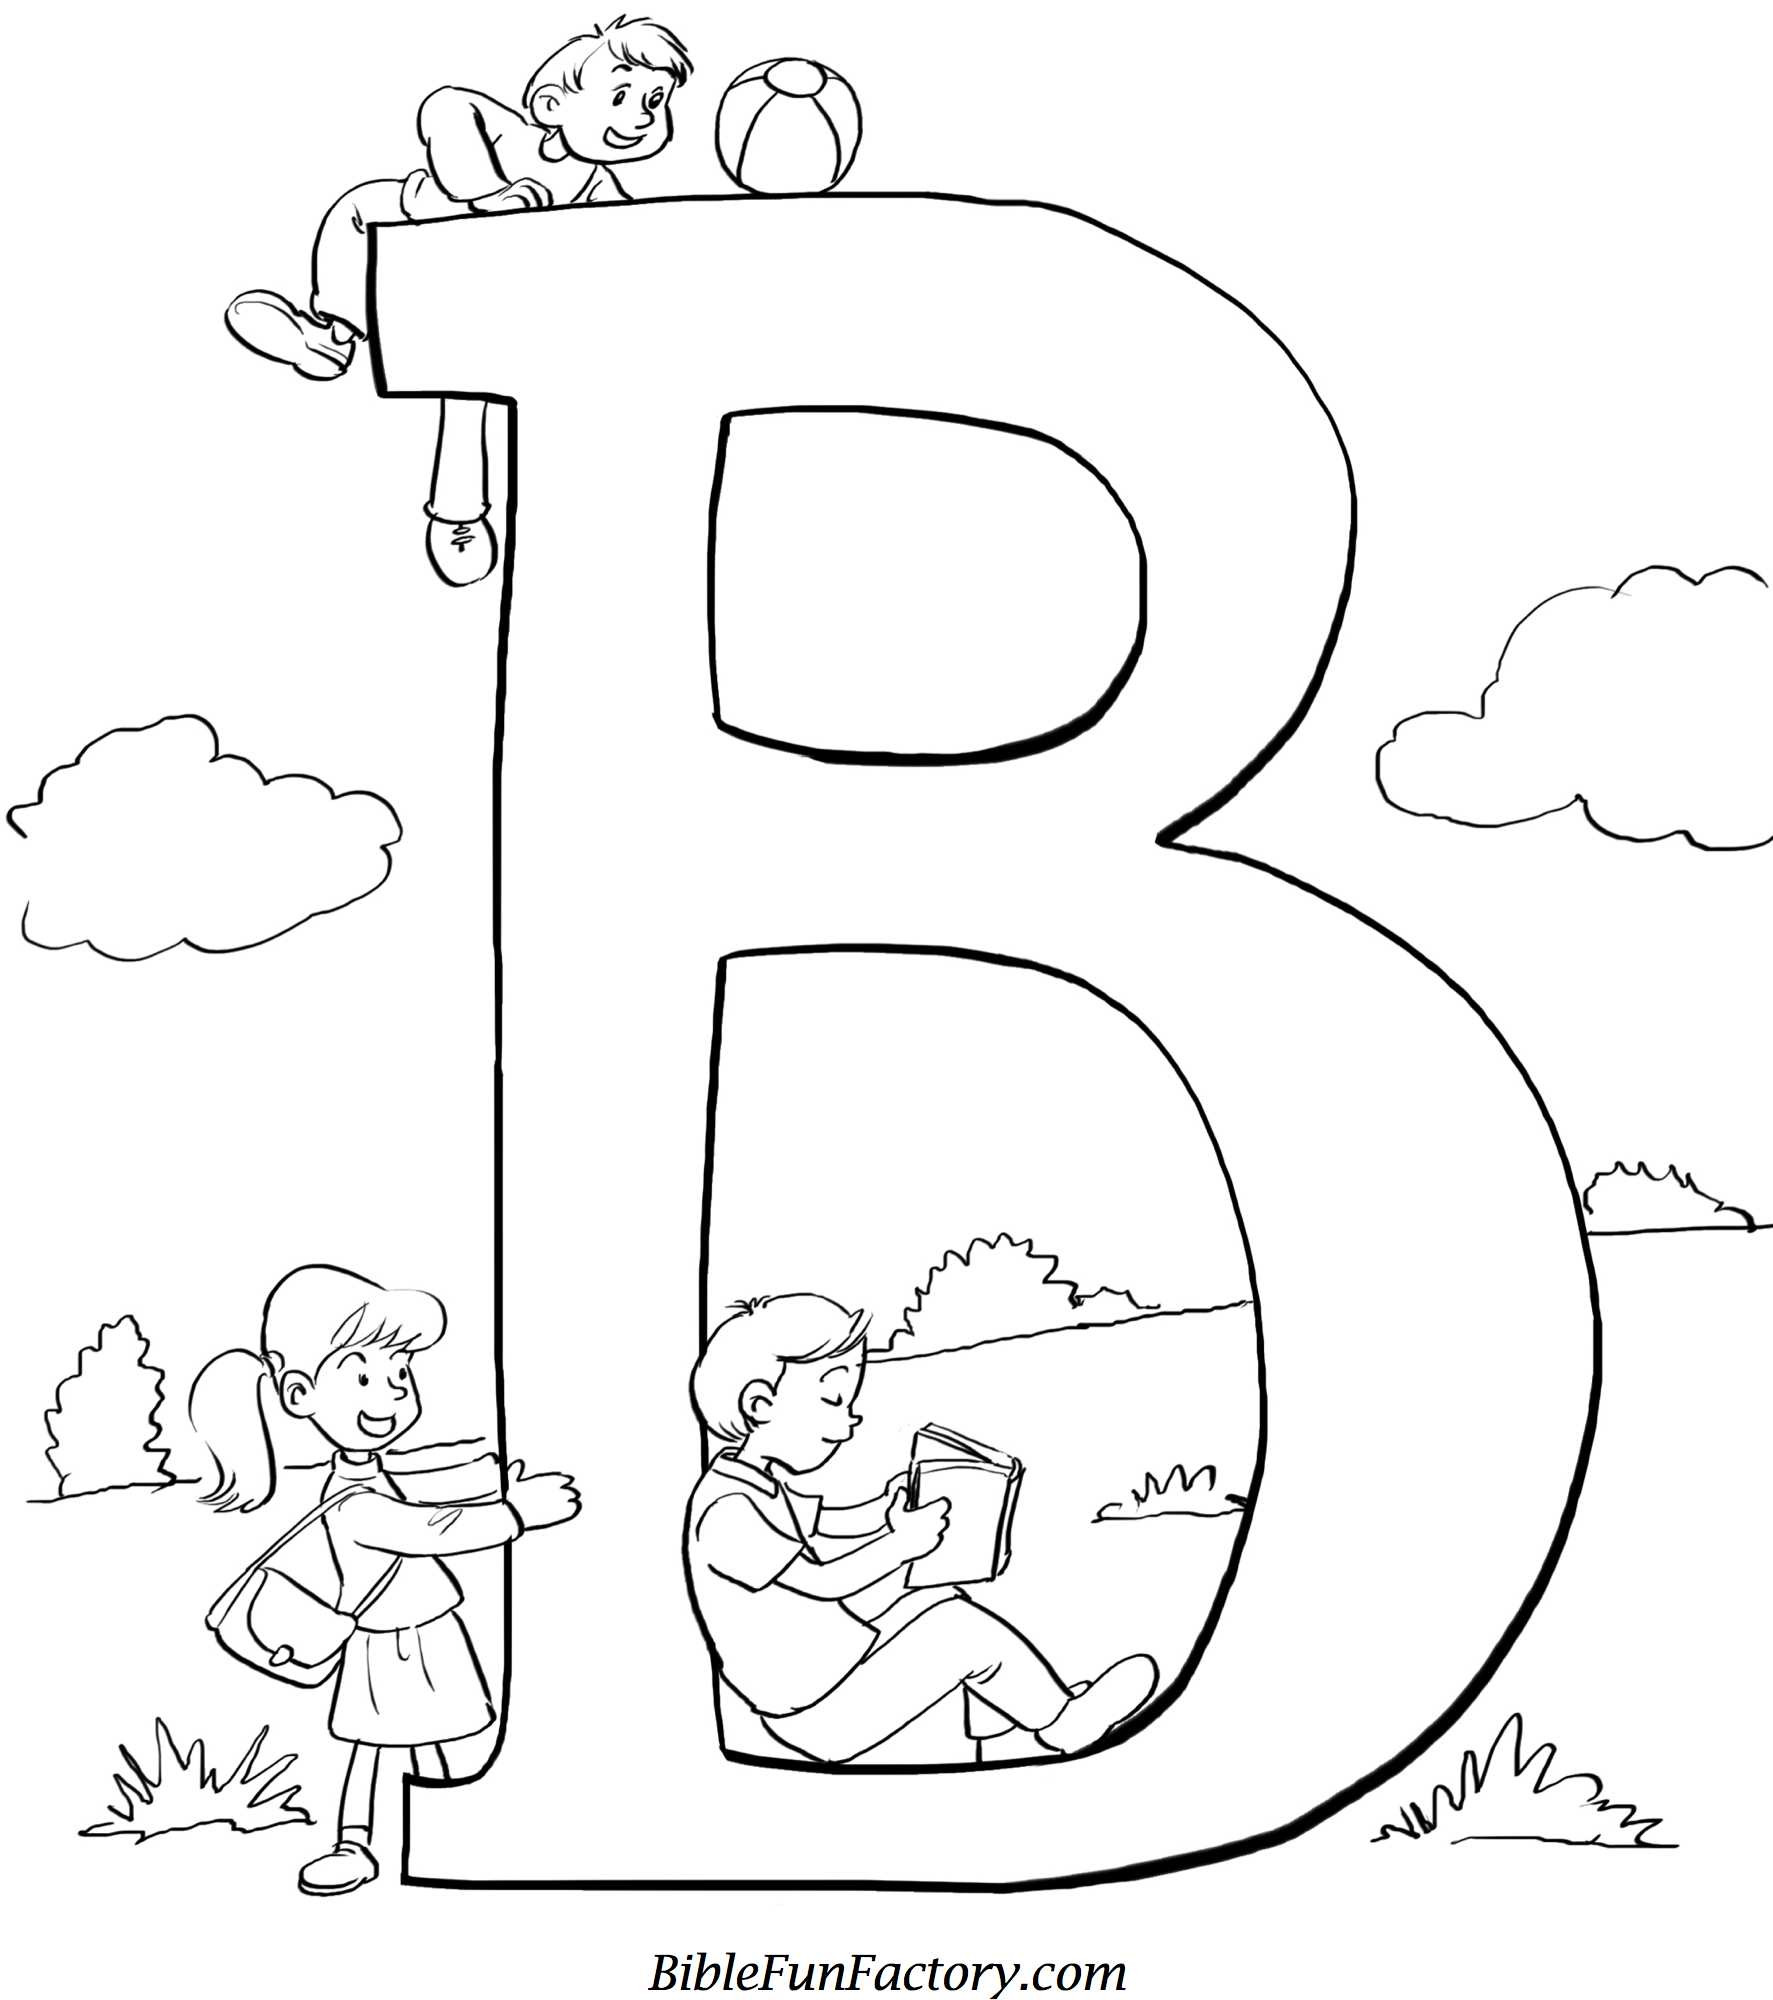 Scripture Coloring Pages For Kids
 Bible Coloring Sheet "B" is for Bible